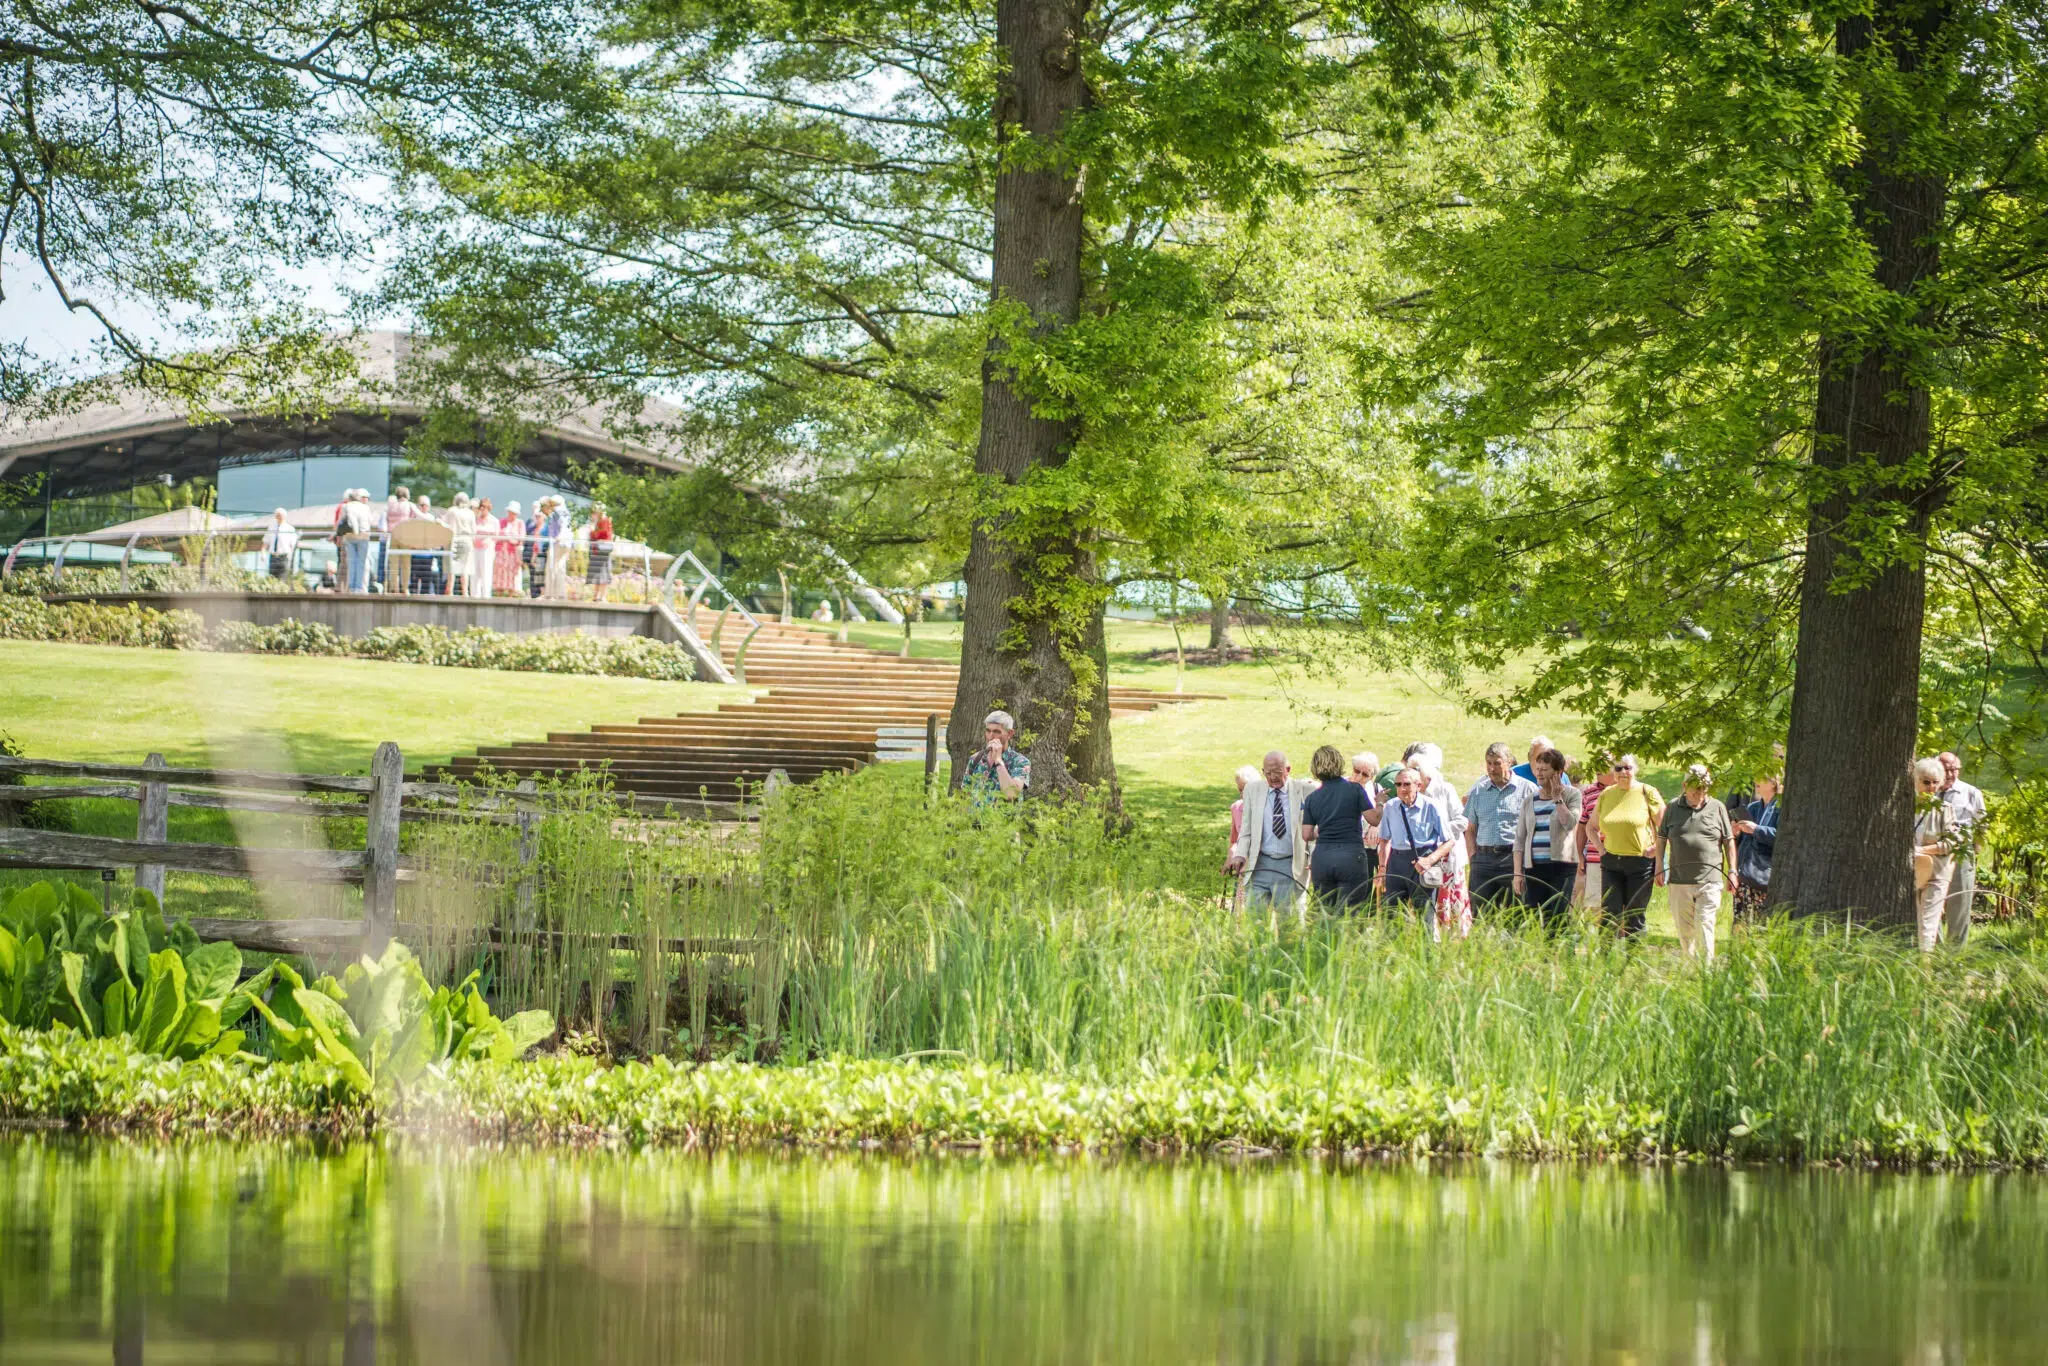 Group visiting The Savill Garden with views of the Visitor Centre, tress and pond.